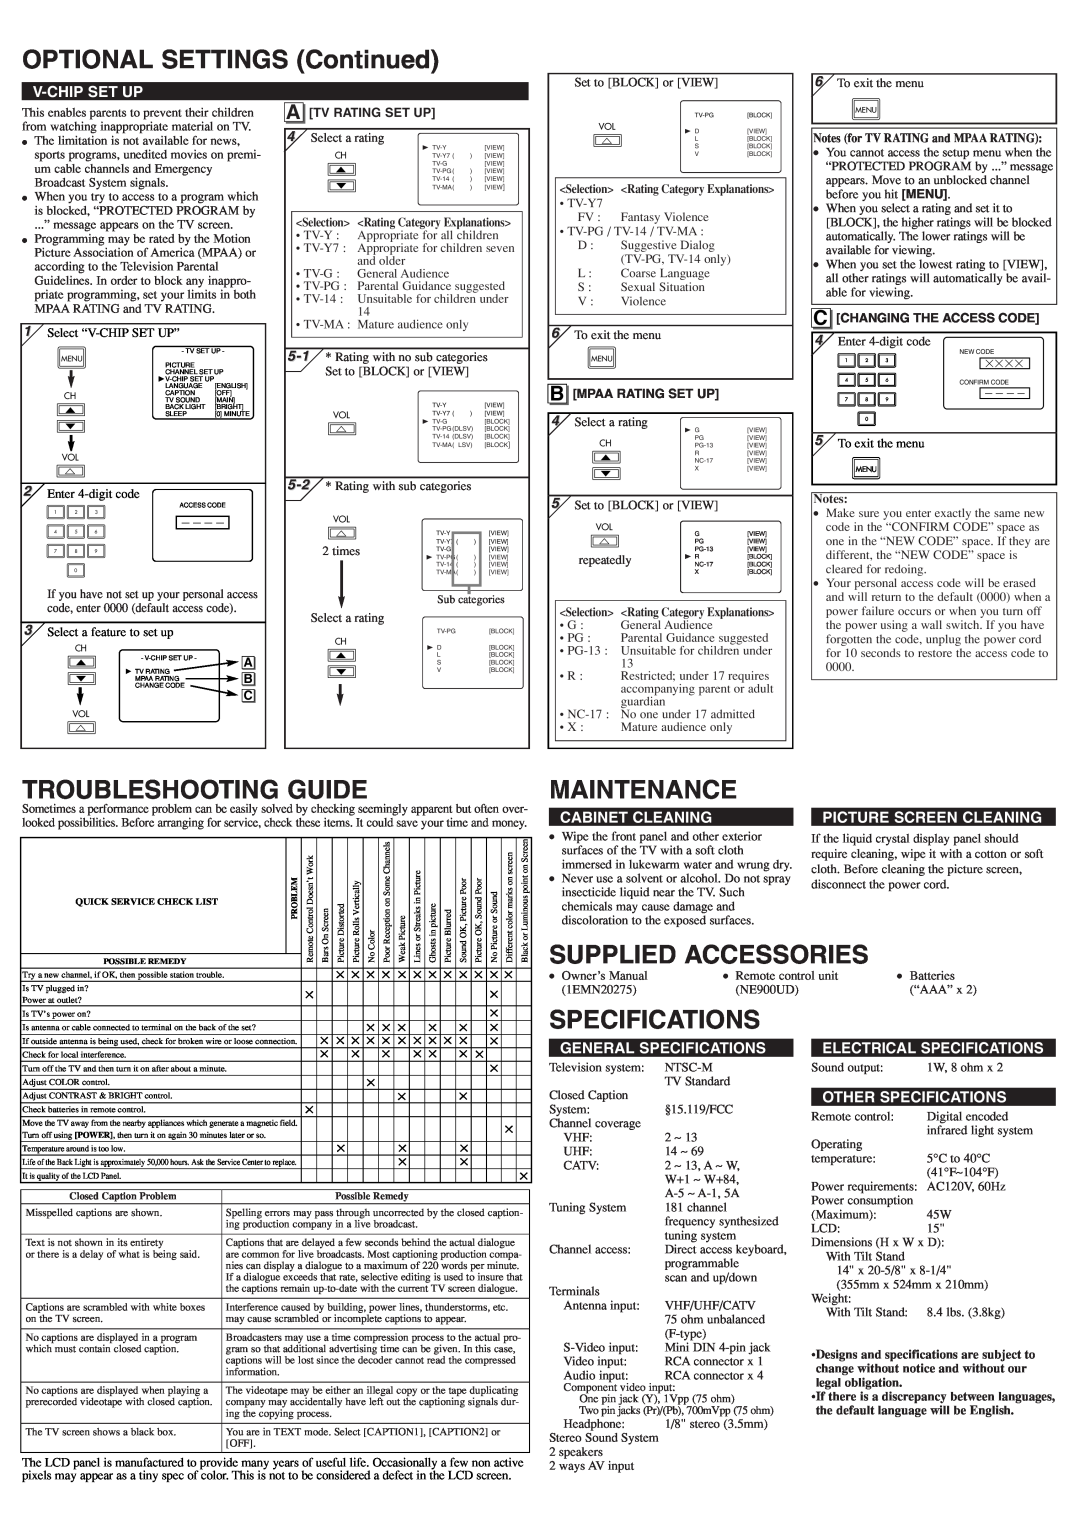 Sylvania 6615LF owner manual OPTIONAL SETTINGS Continued, Troubleshooting Guide, Maintenance, Specifications, V-Chip Set Up 